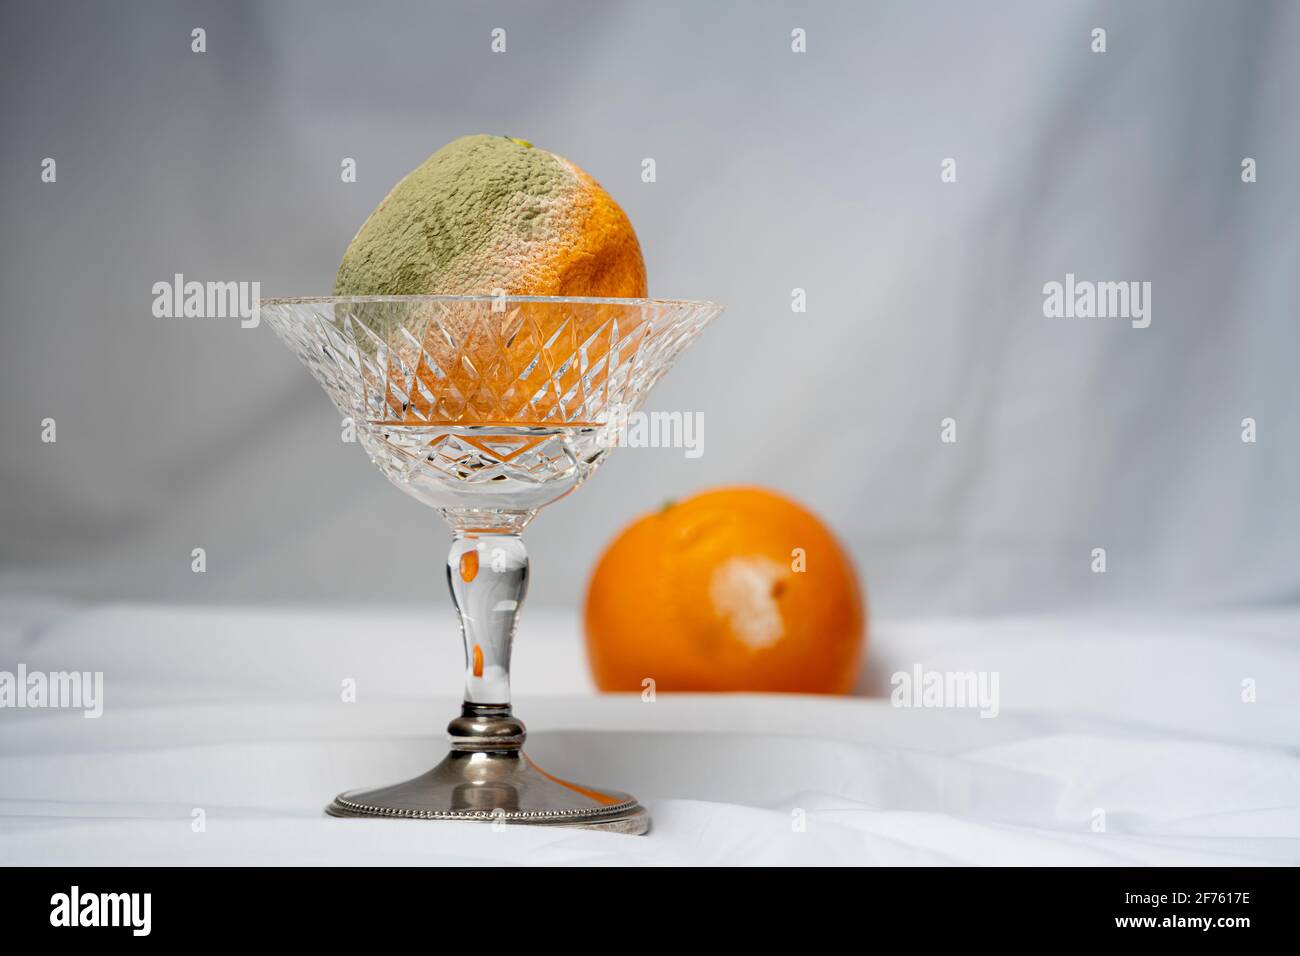 Rotting orange citrus fruit with green mold growing on the skin in a cut glass stem bowl Stock Photo